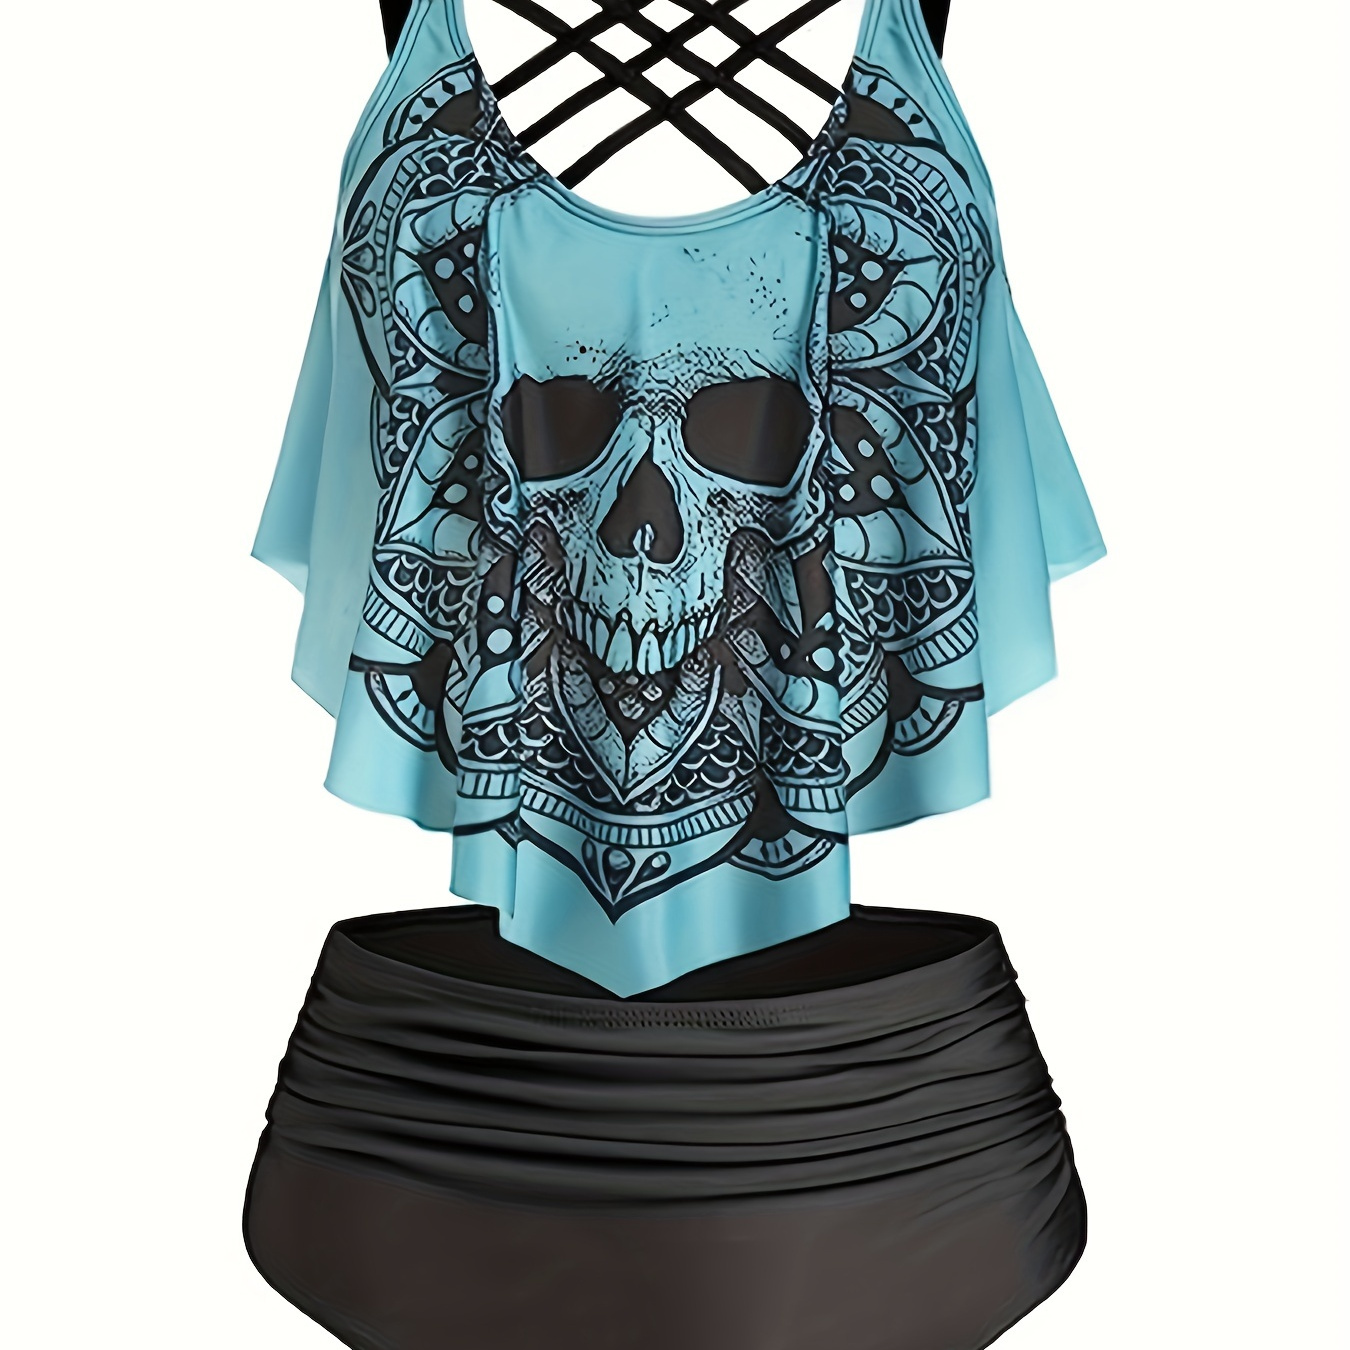 High Waisted Gothic Skull Bone Tankini Womens Tankini Swimsuits For Women  Aesthetic Bathing Suit With Cartoon Print, Plus Size Available For Surfing  And Beach Outfits From Cookfurnace, $25.85